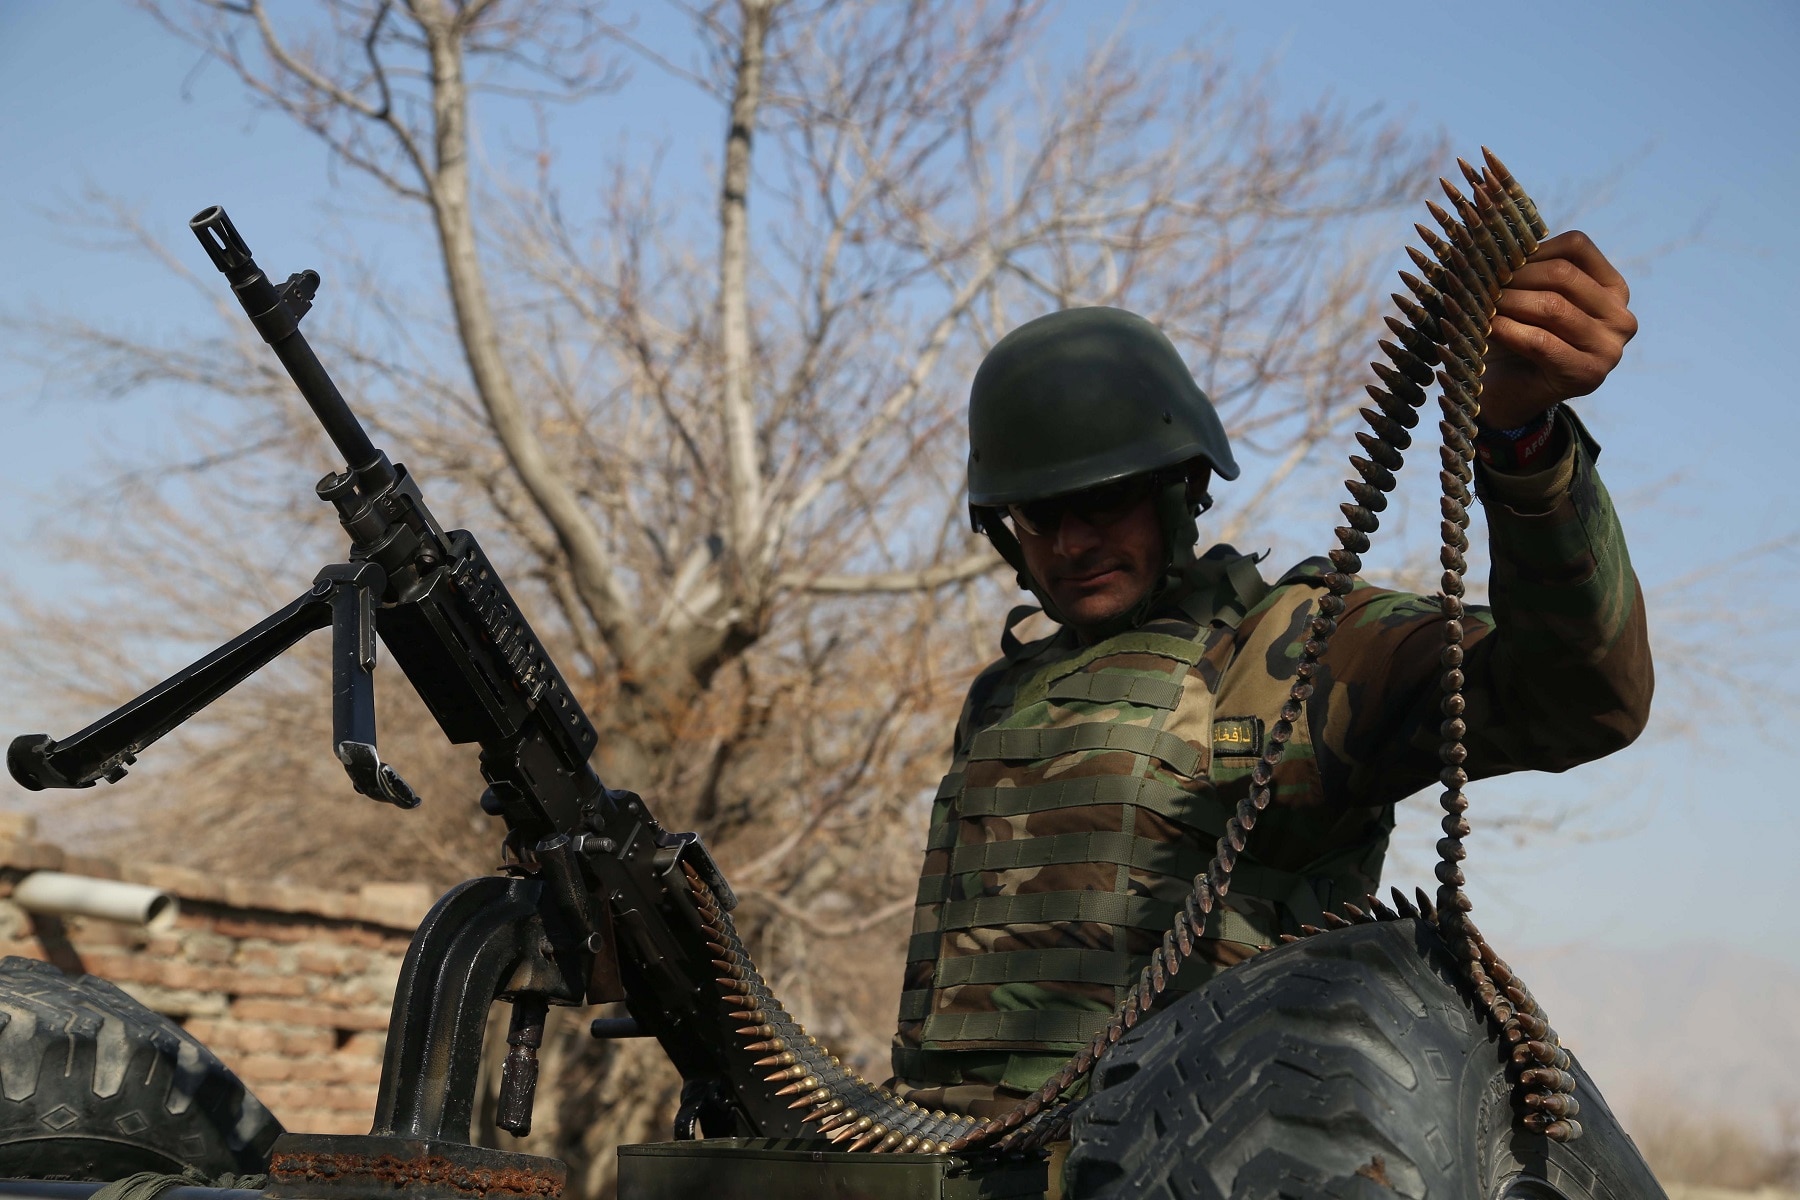 An Afghan Army soldier stands guard at a check point near the Shirzad district in Hogyani district of Nangarhar province, Afghanistan.